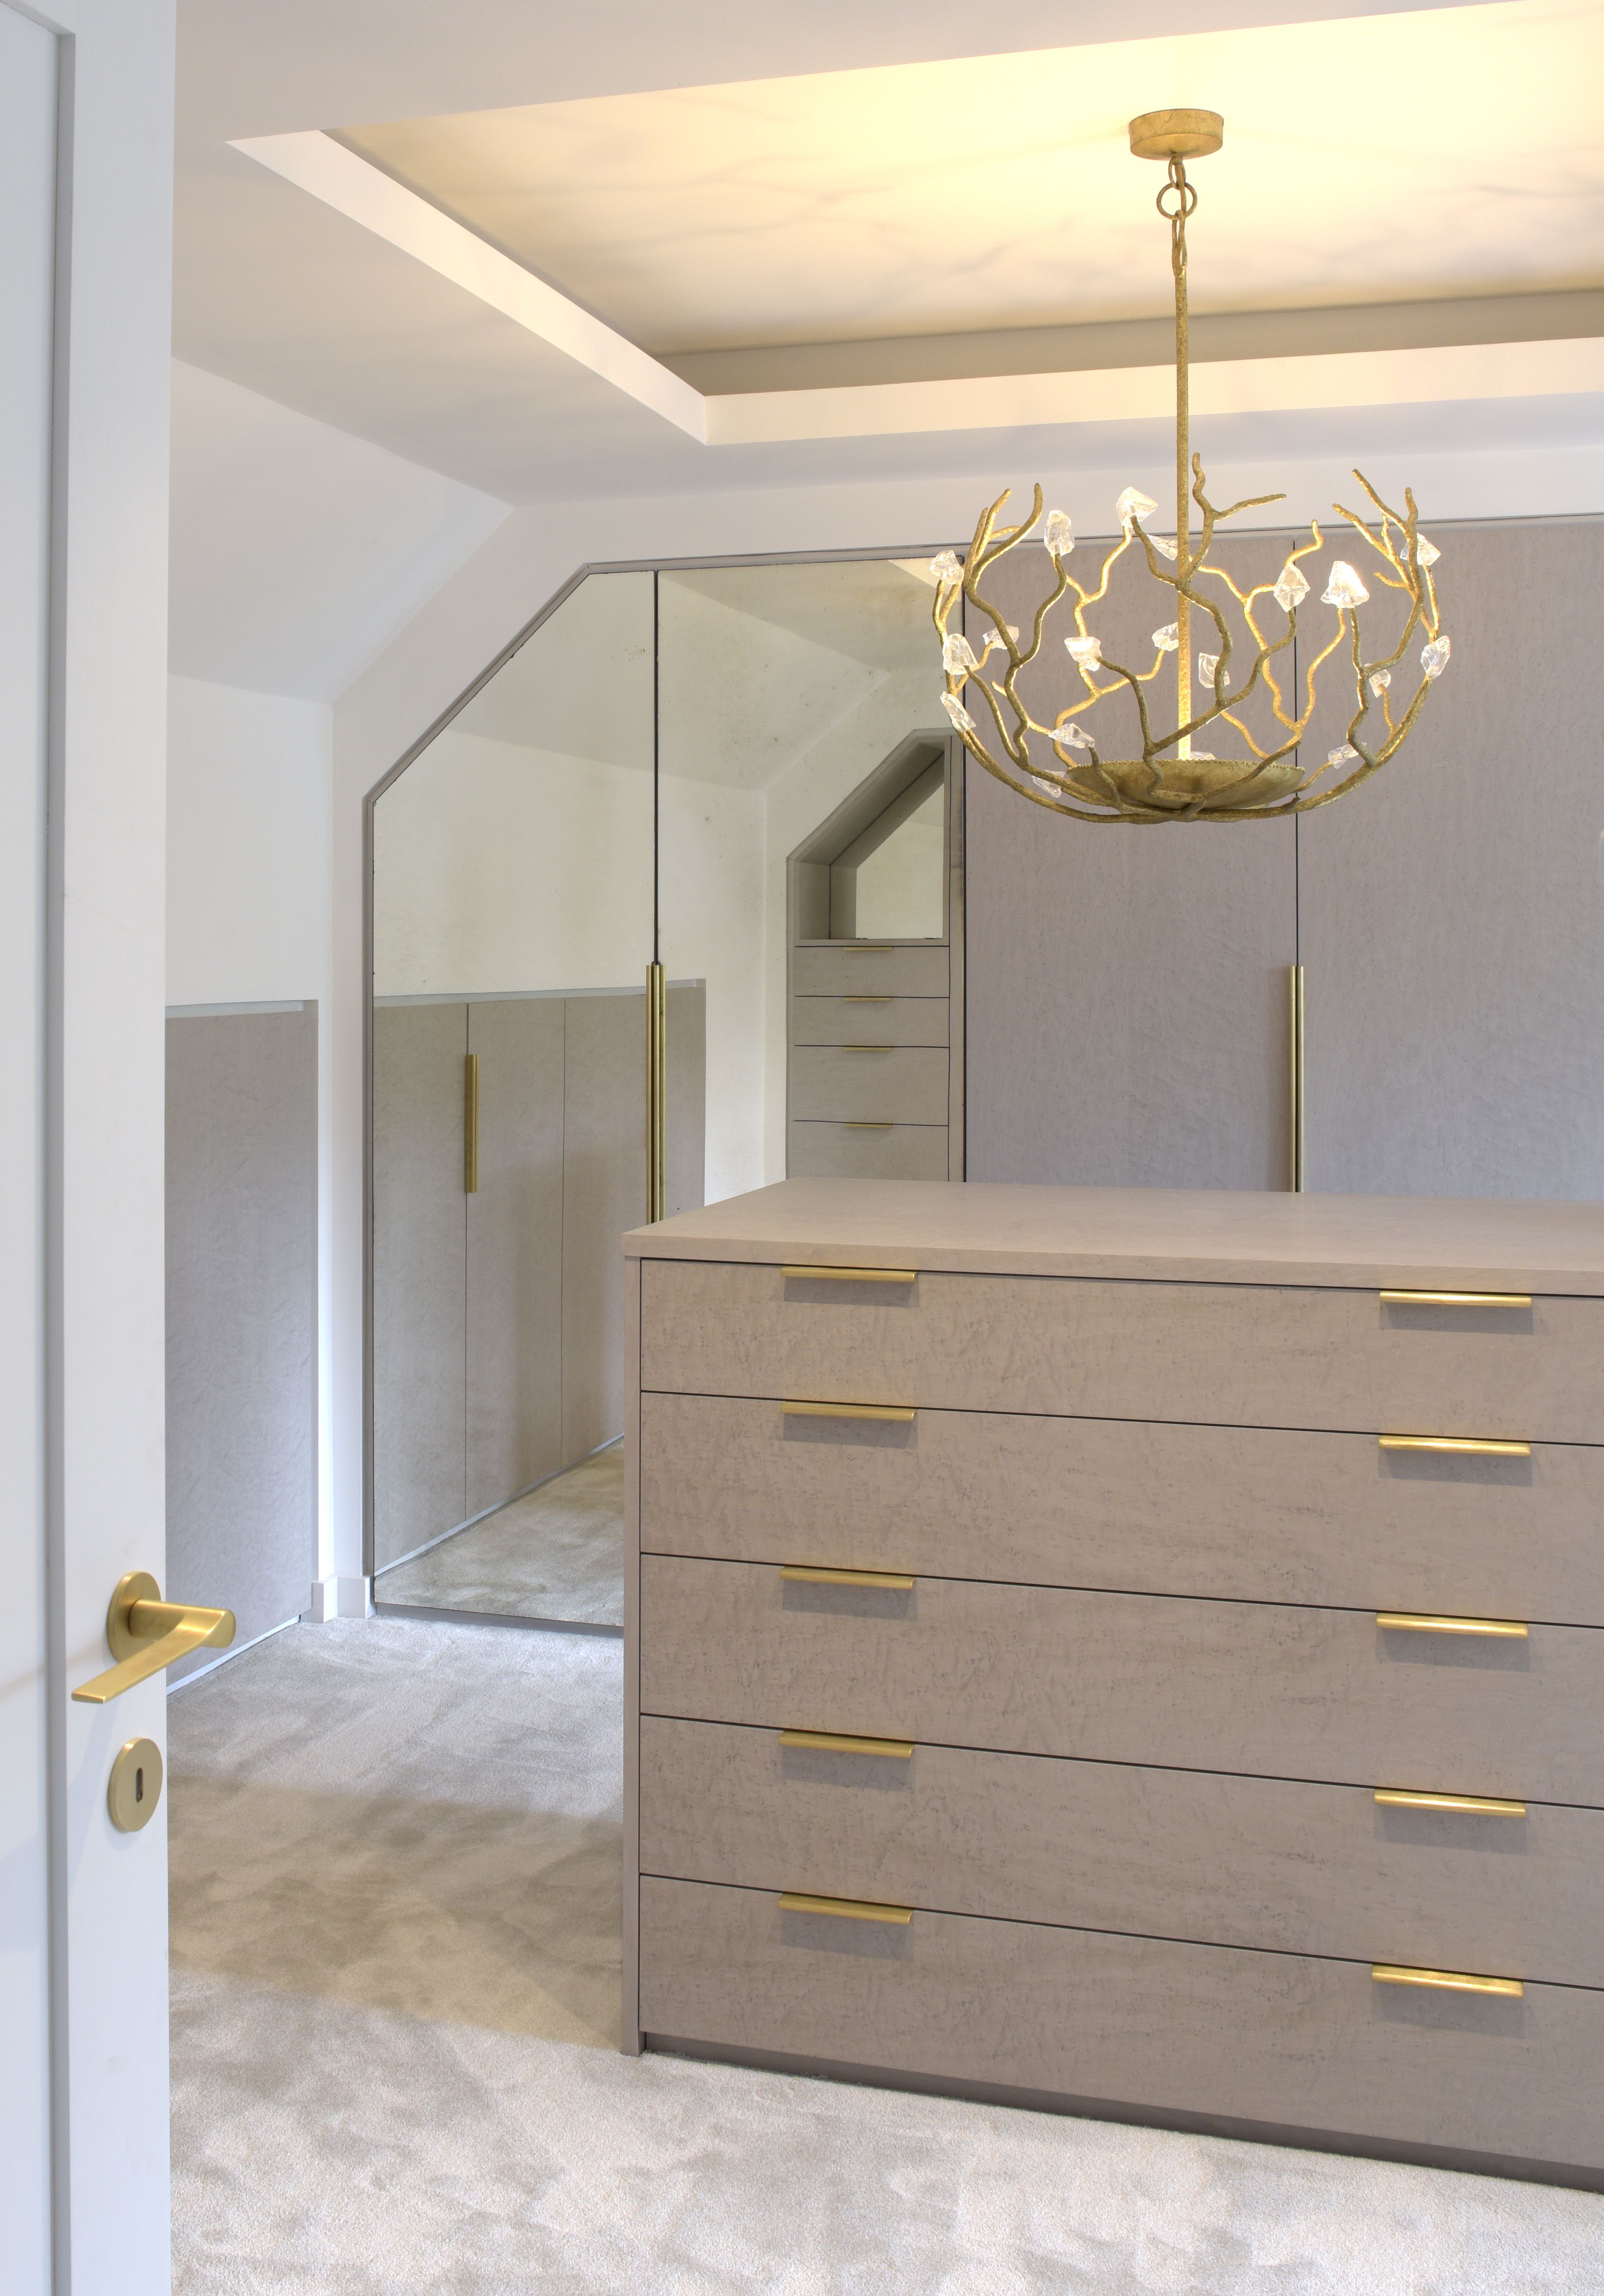 Luxurious dressing room with lit ceiling and central island with gold chandelier